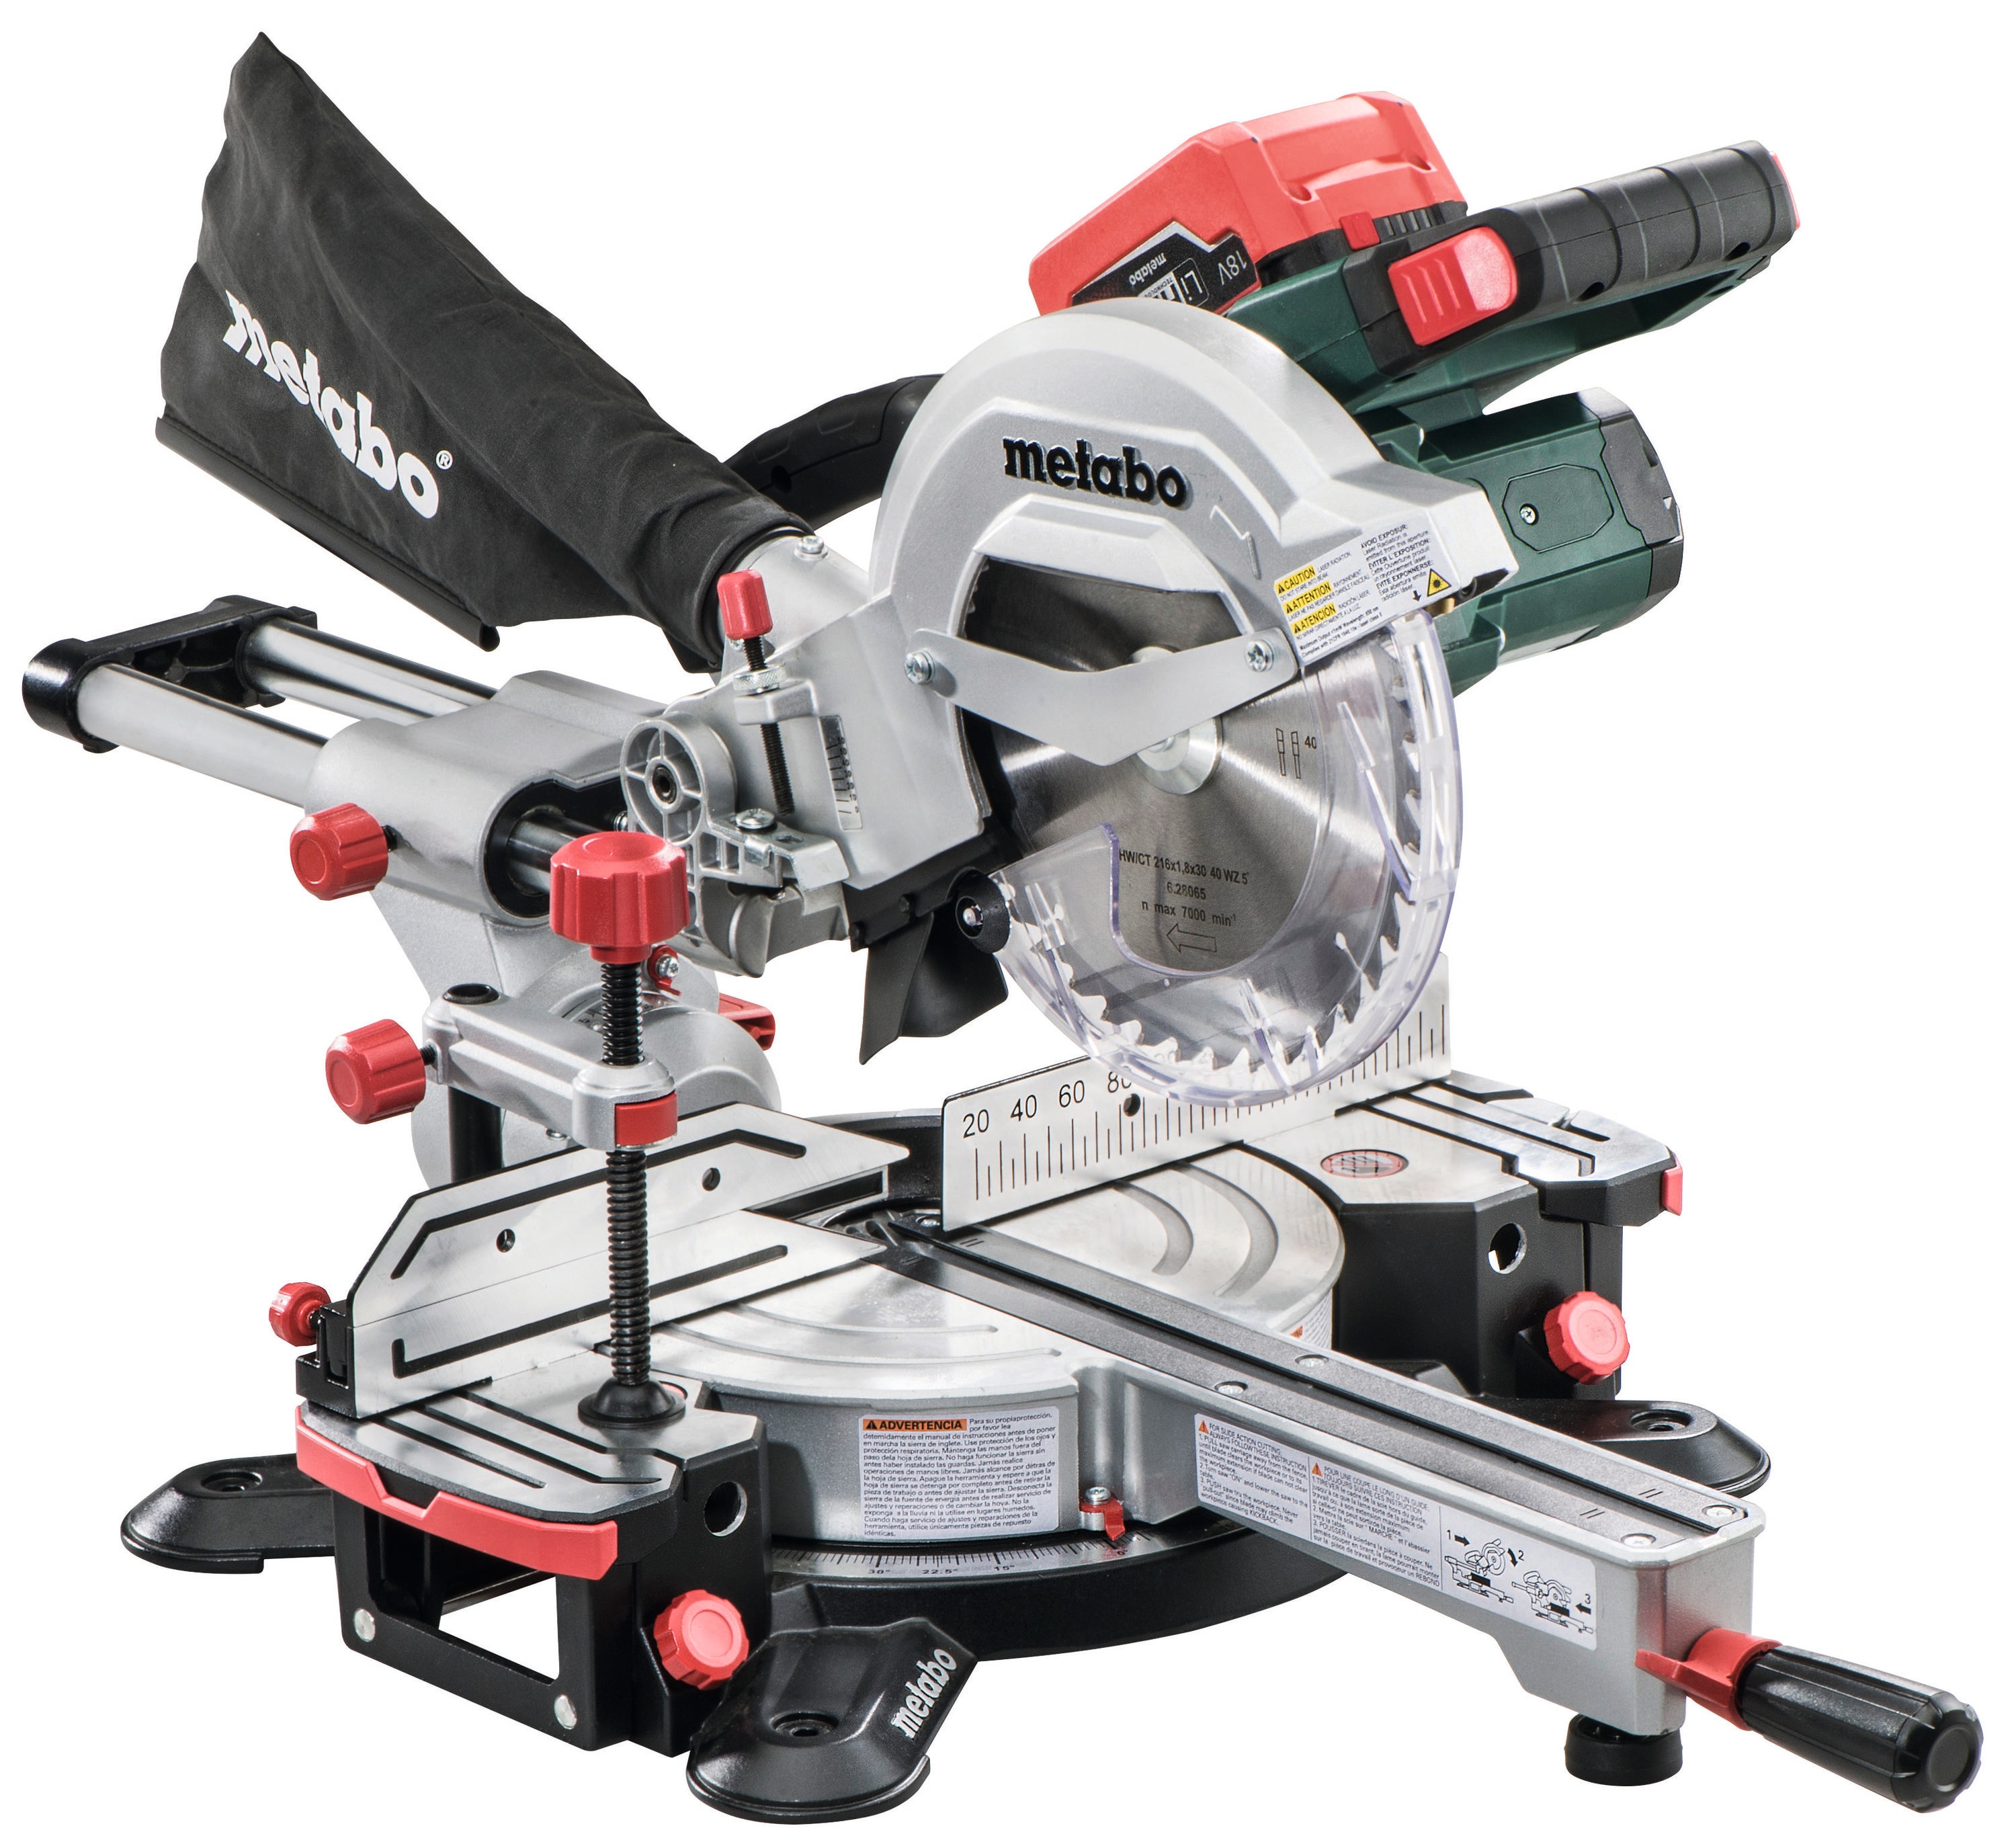 Cordless 8-1/2-in 6.2-Amp Single Bevel Sliding Compound Miter Saw with Laser Guide | - Metabo KGS18 LTX 216 6.2AH